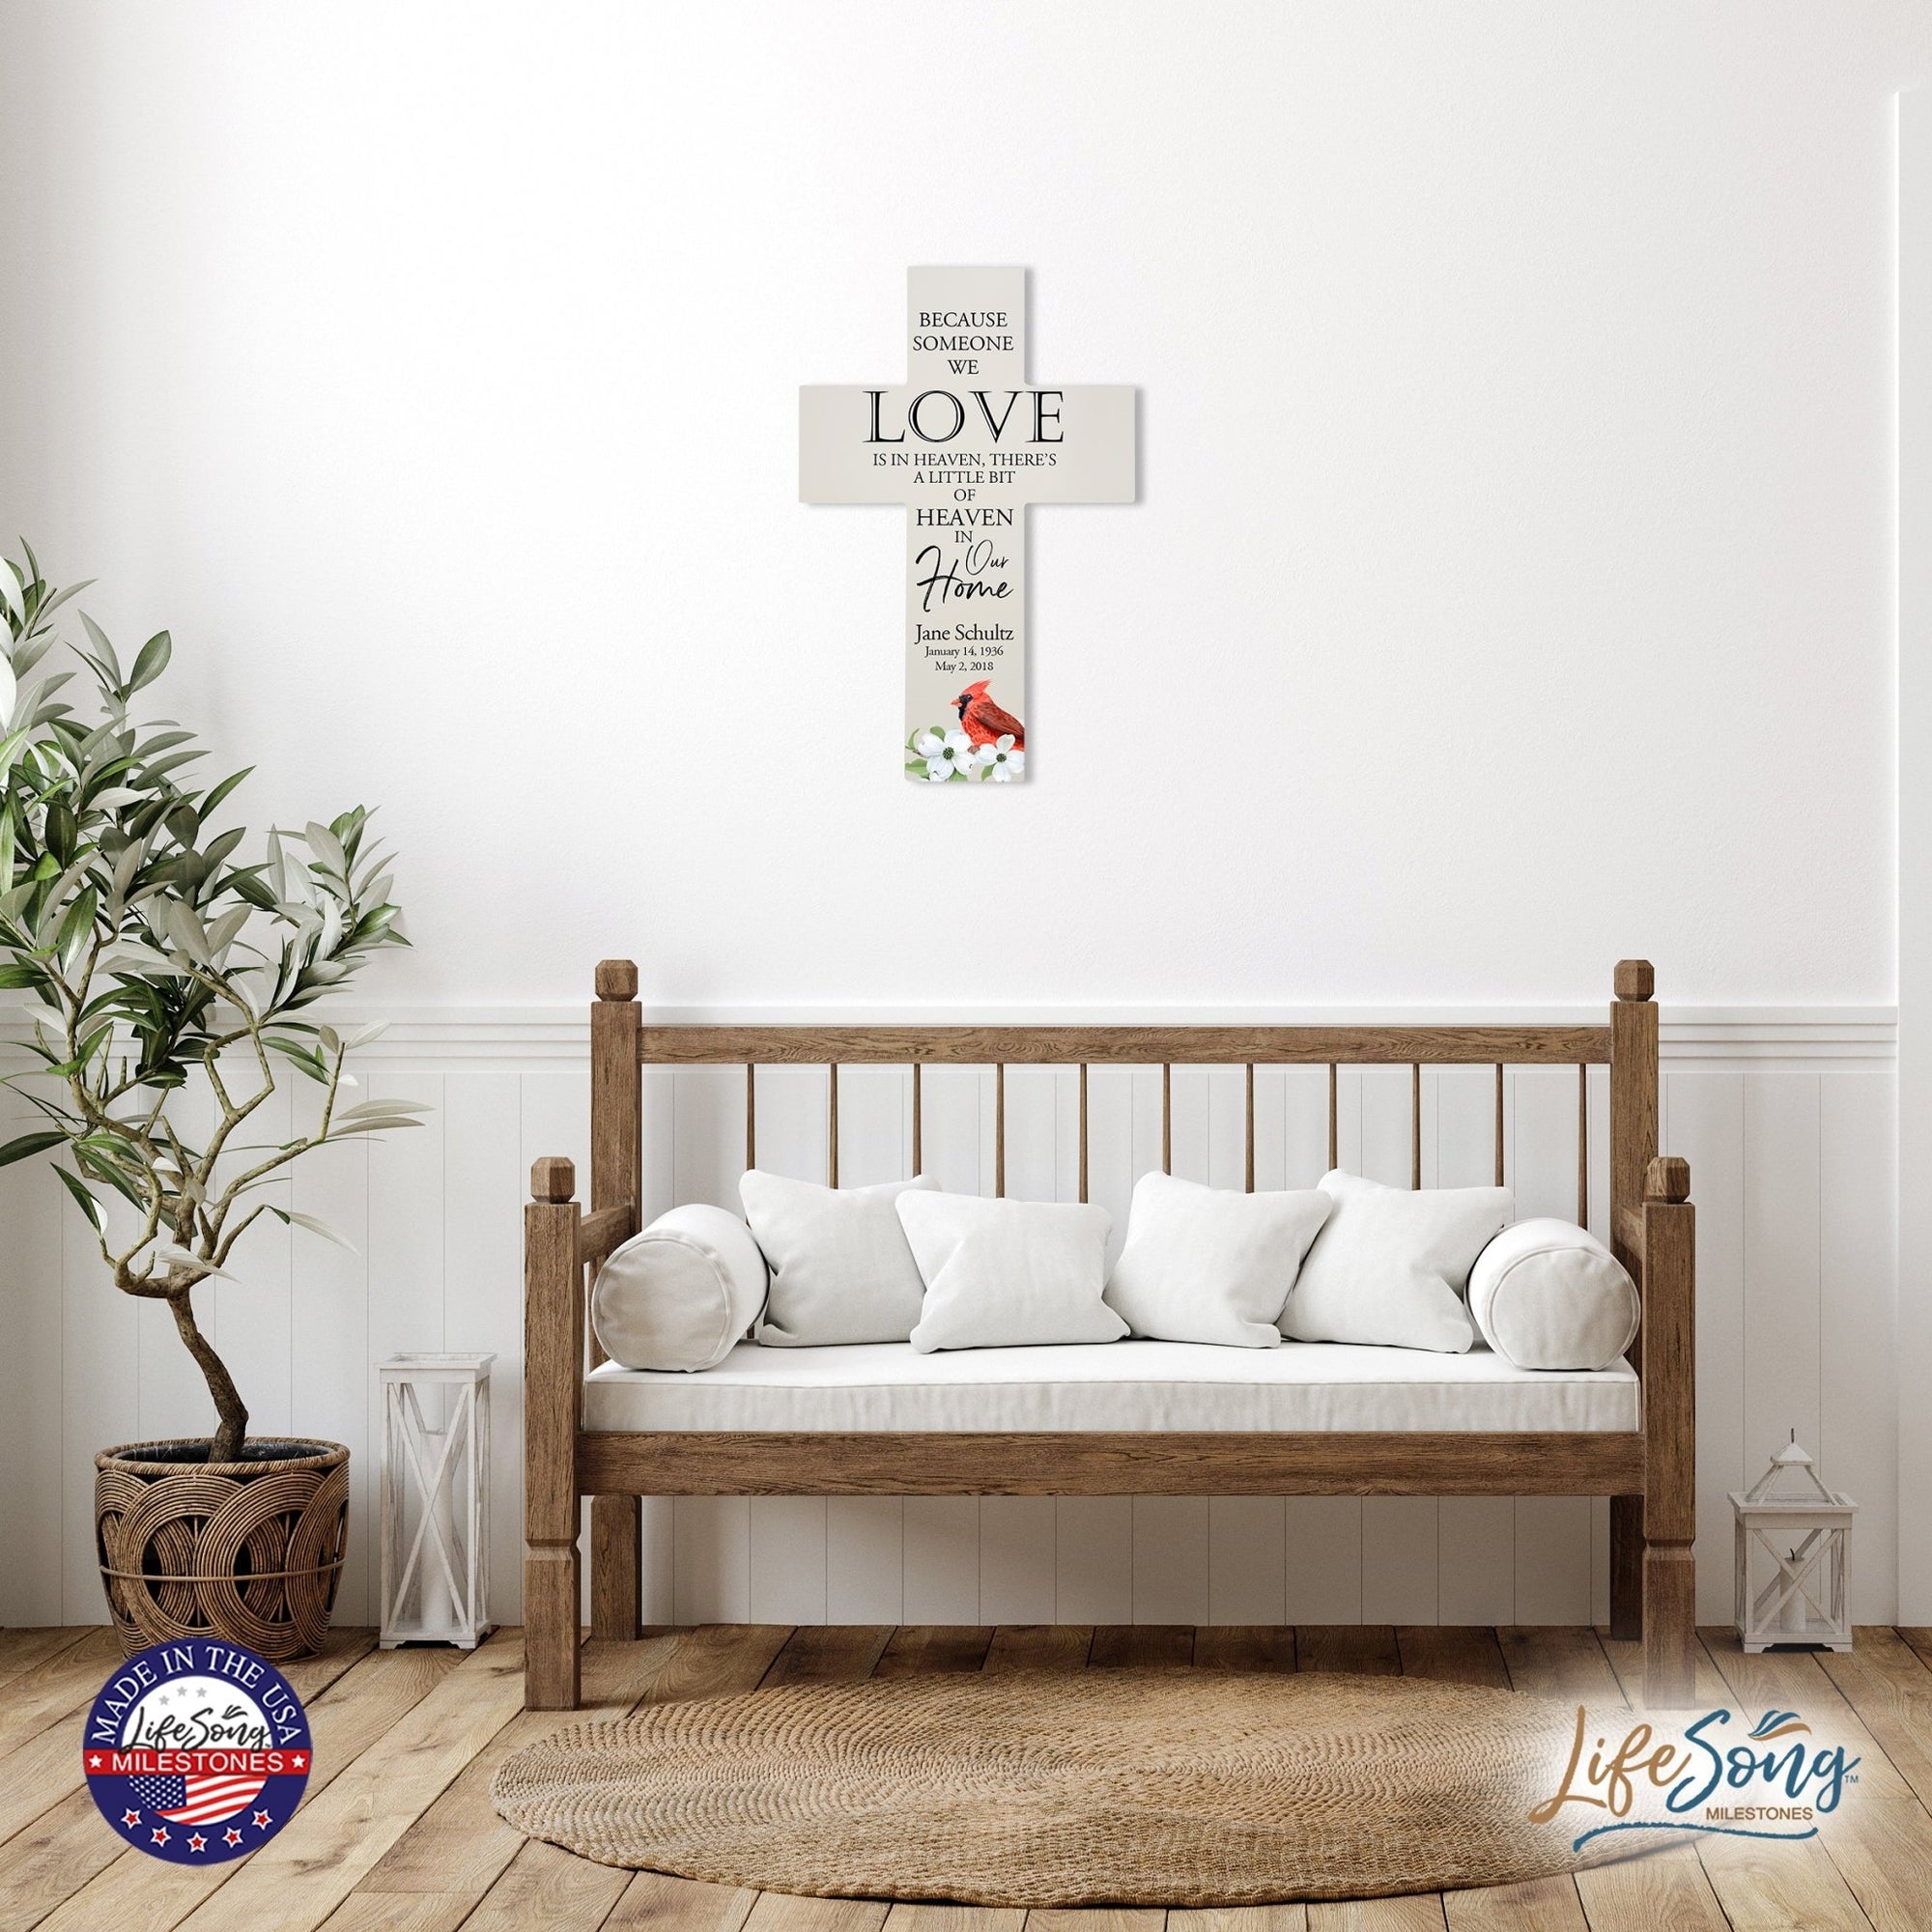 Personalized Red Cardinal Memorial Bereavement Wall Cross For Loss of Loved One Because Someone We Love (Cardinal) Quote 14 x 9.25 Because Someone We Love Is In Heaven, There's A Little Bit Of Heaven In Our Home - LifeSong Milestones